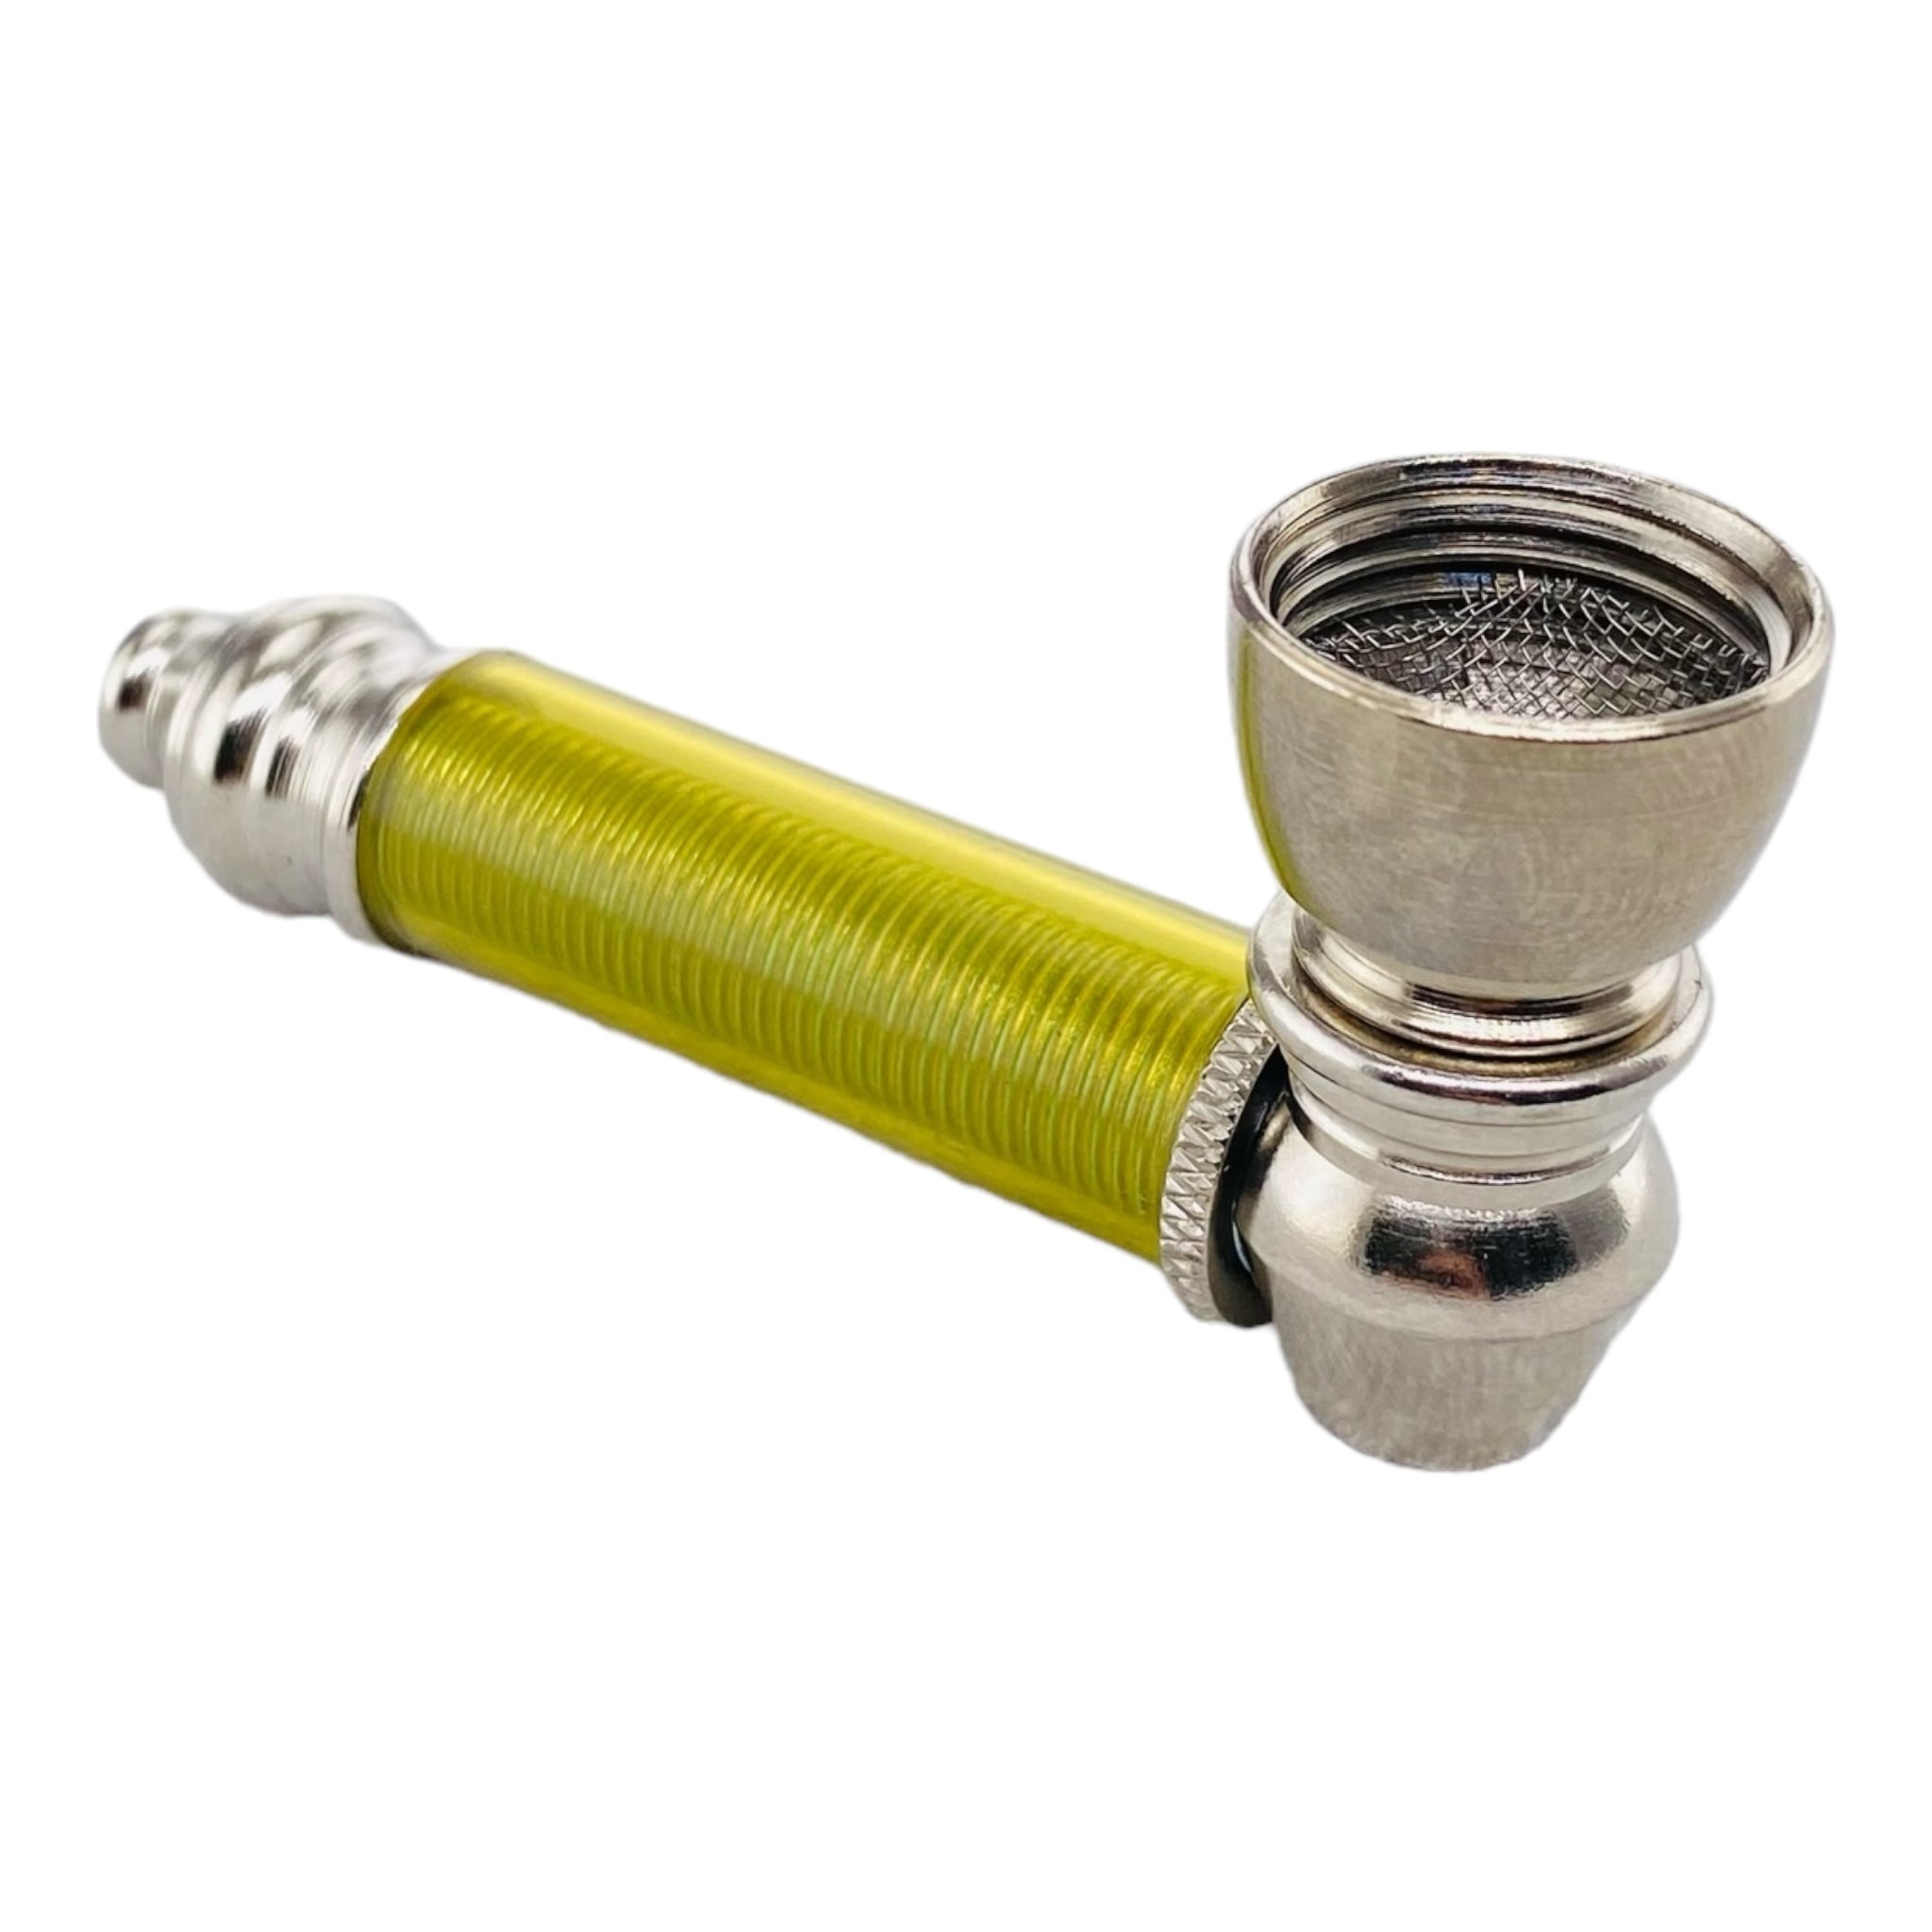 Metal Hand Pipes - Silver Chrome Hand Pipe With Yellow Plastic Stem